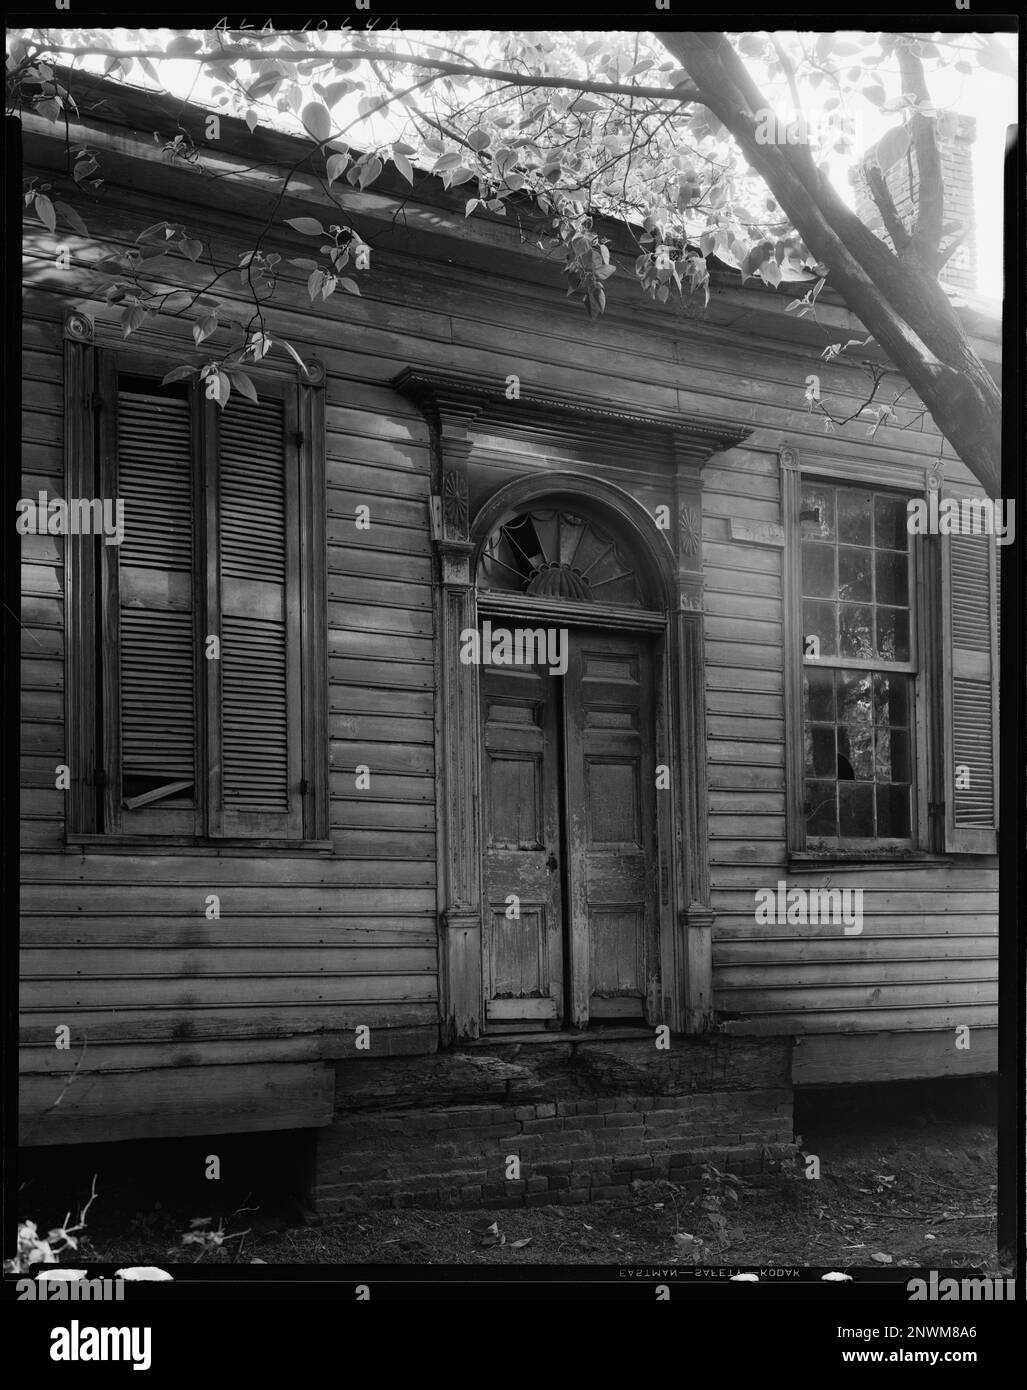 Campbell House, Courtland, Lawrence County, Alabama. Carnegie Survey of the Architecture of the South. Stati Uniti, Alabama, Lawrence County, Courtland, Houses, Porte e vani porta, Fanlights, persiane, Clapboard. Foto Stock